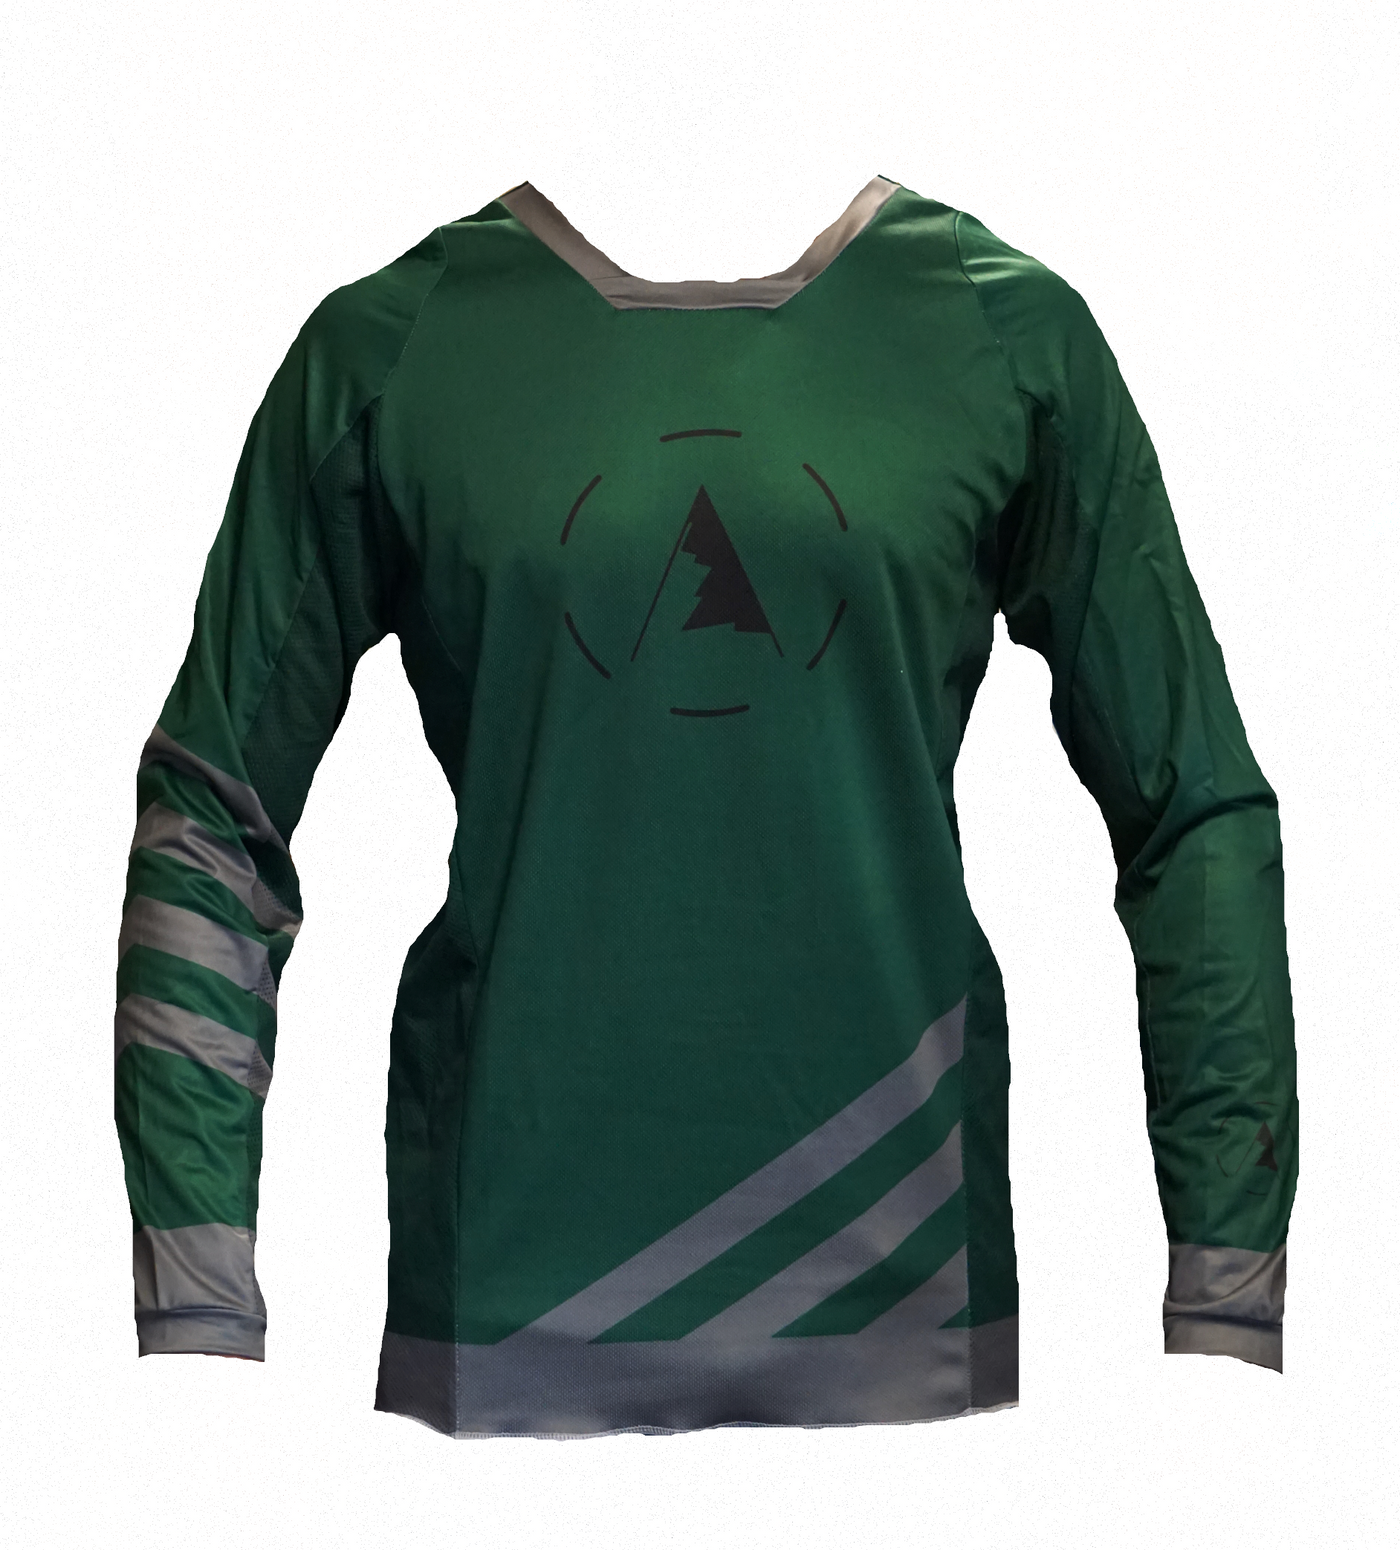 Jersey Mx 22 - Green and Gray